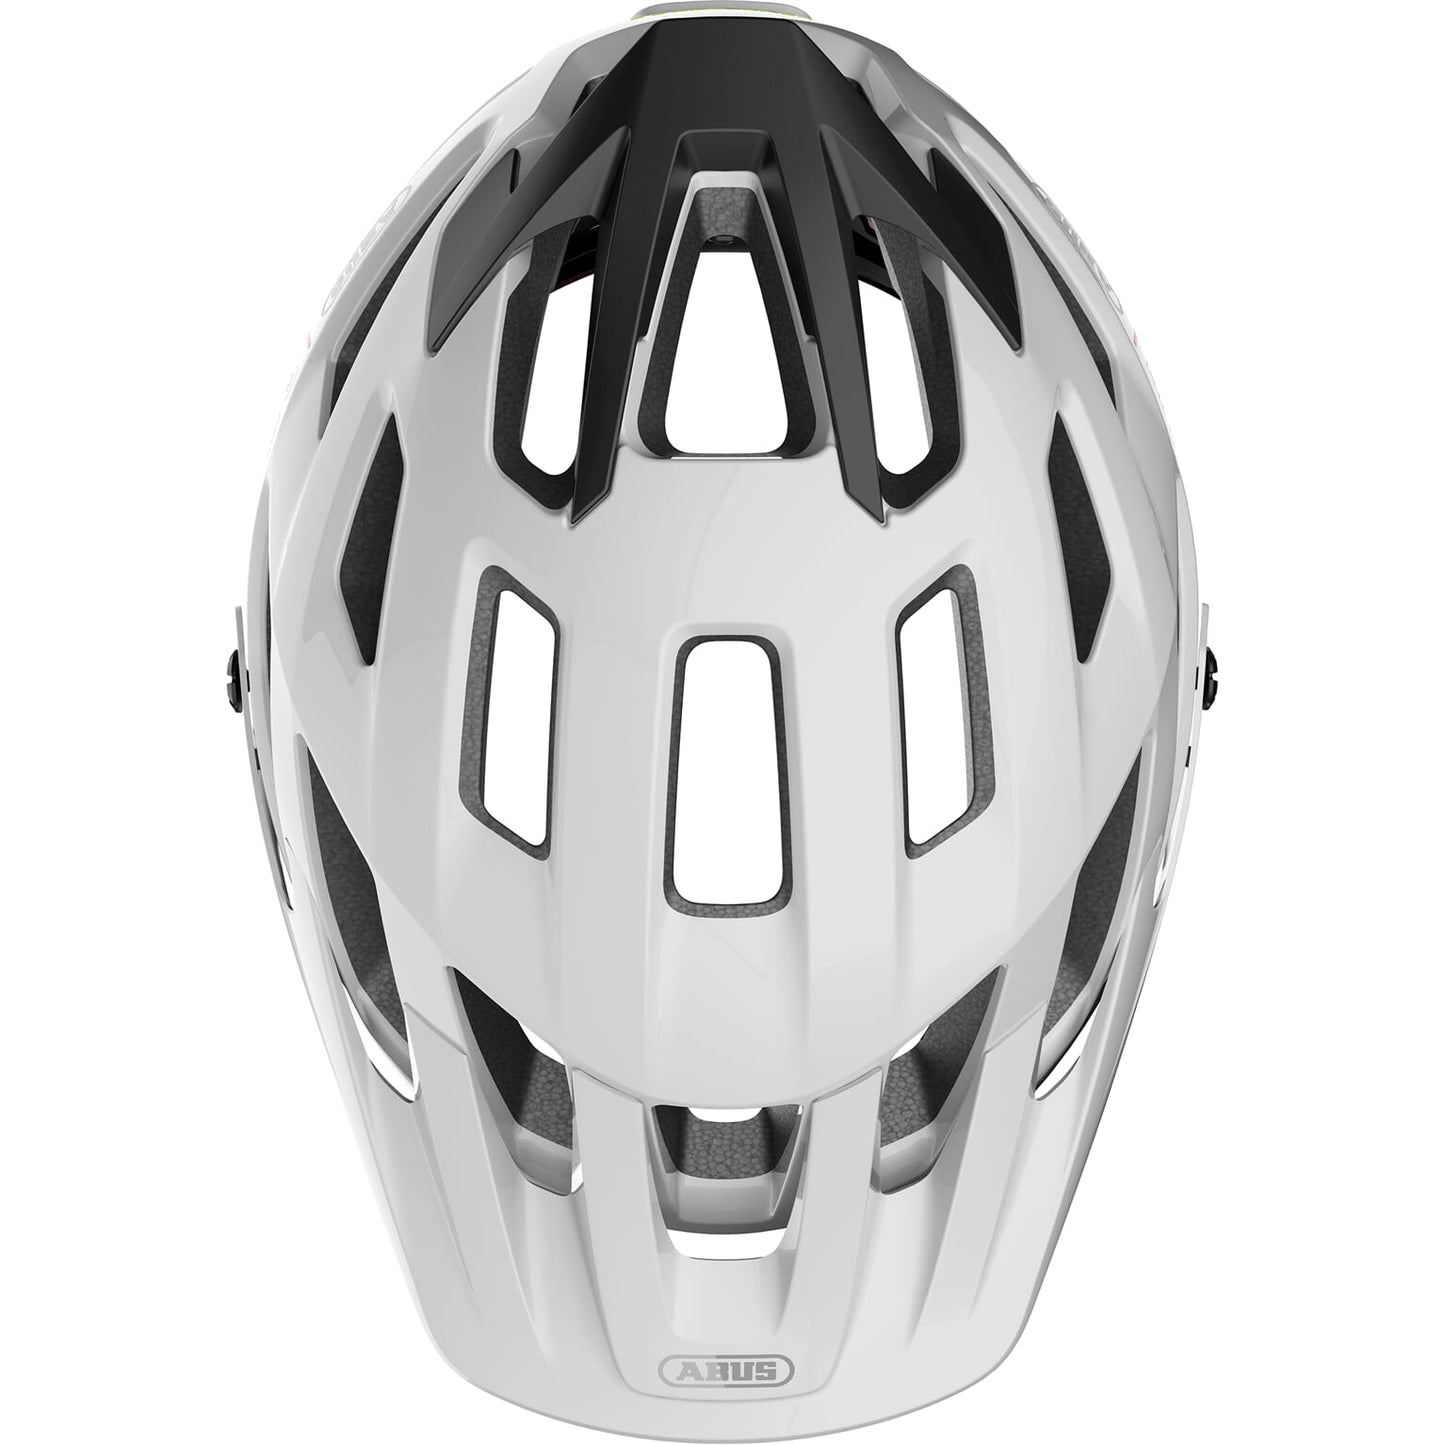 Abus helm MoventGoud 2.0 shiny Wit S 51-55cm